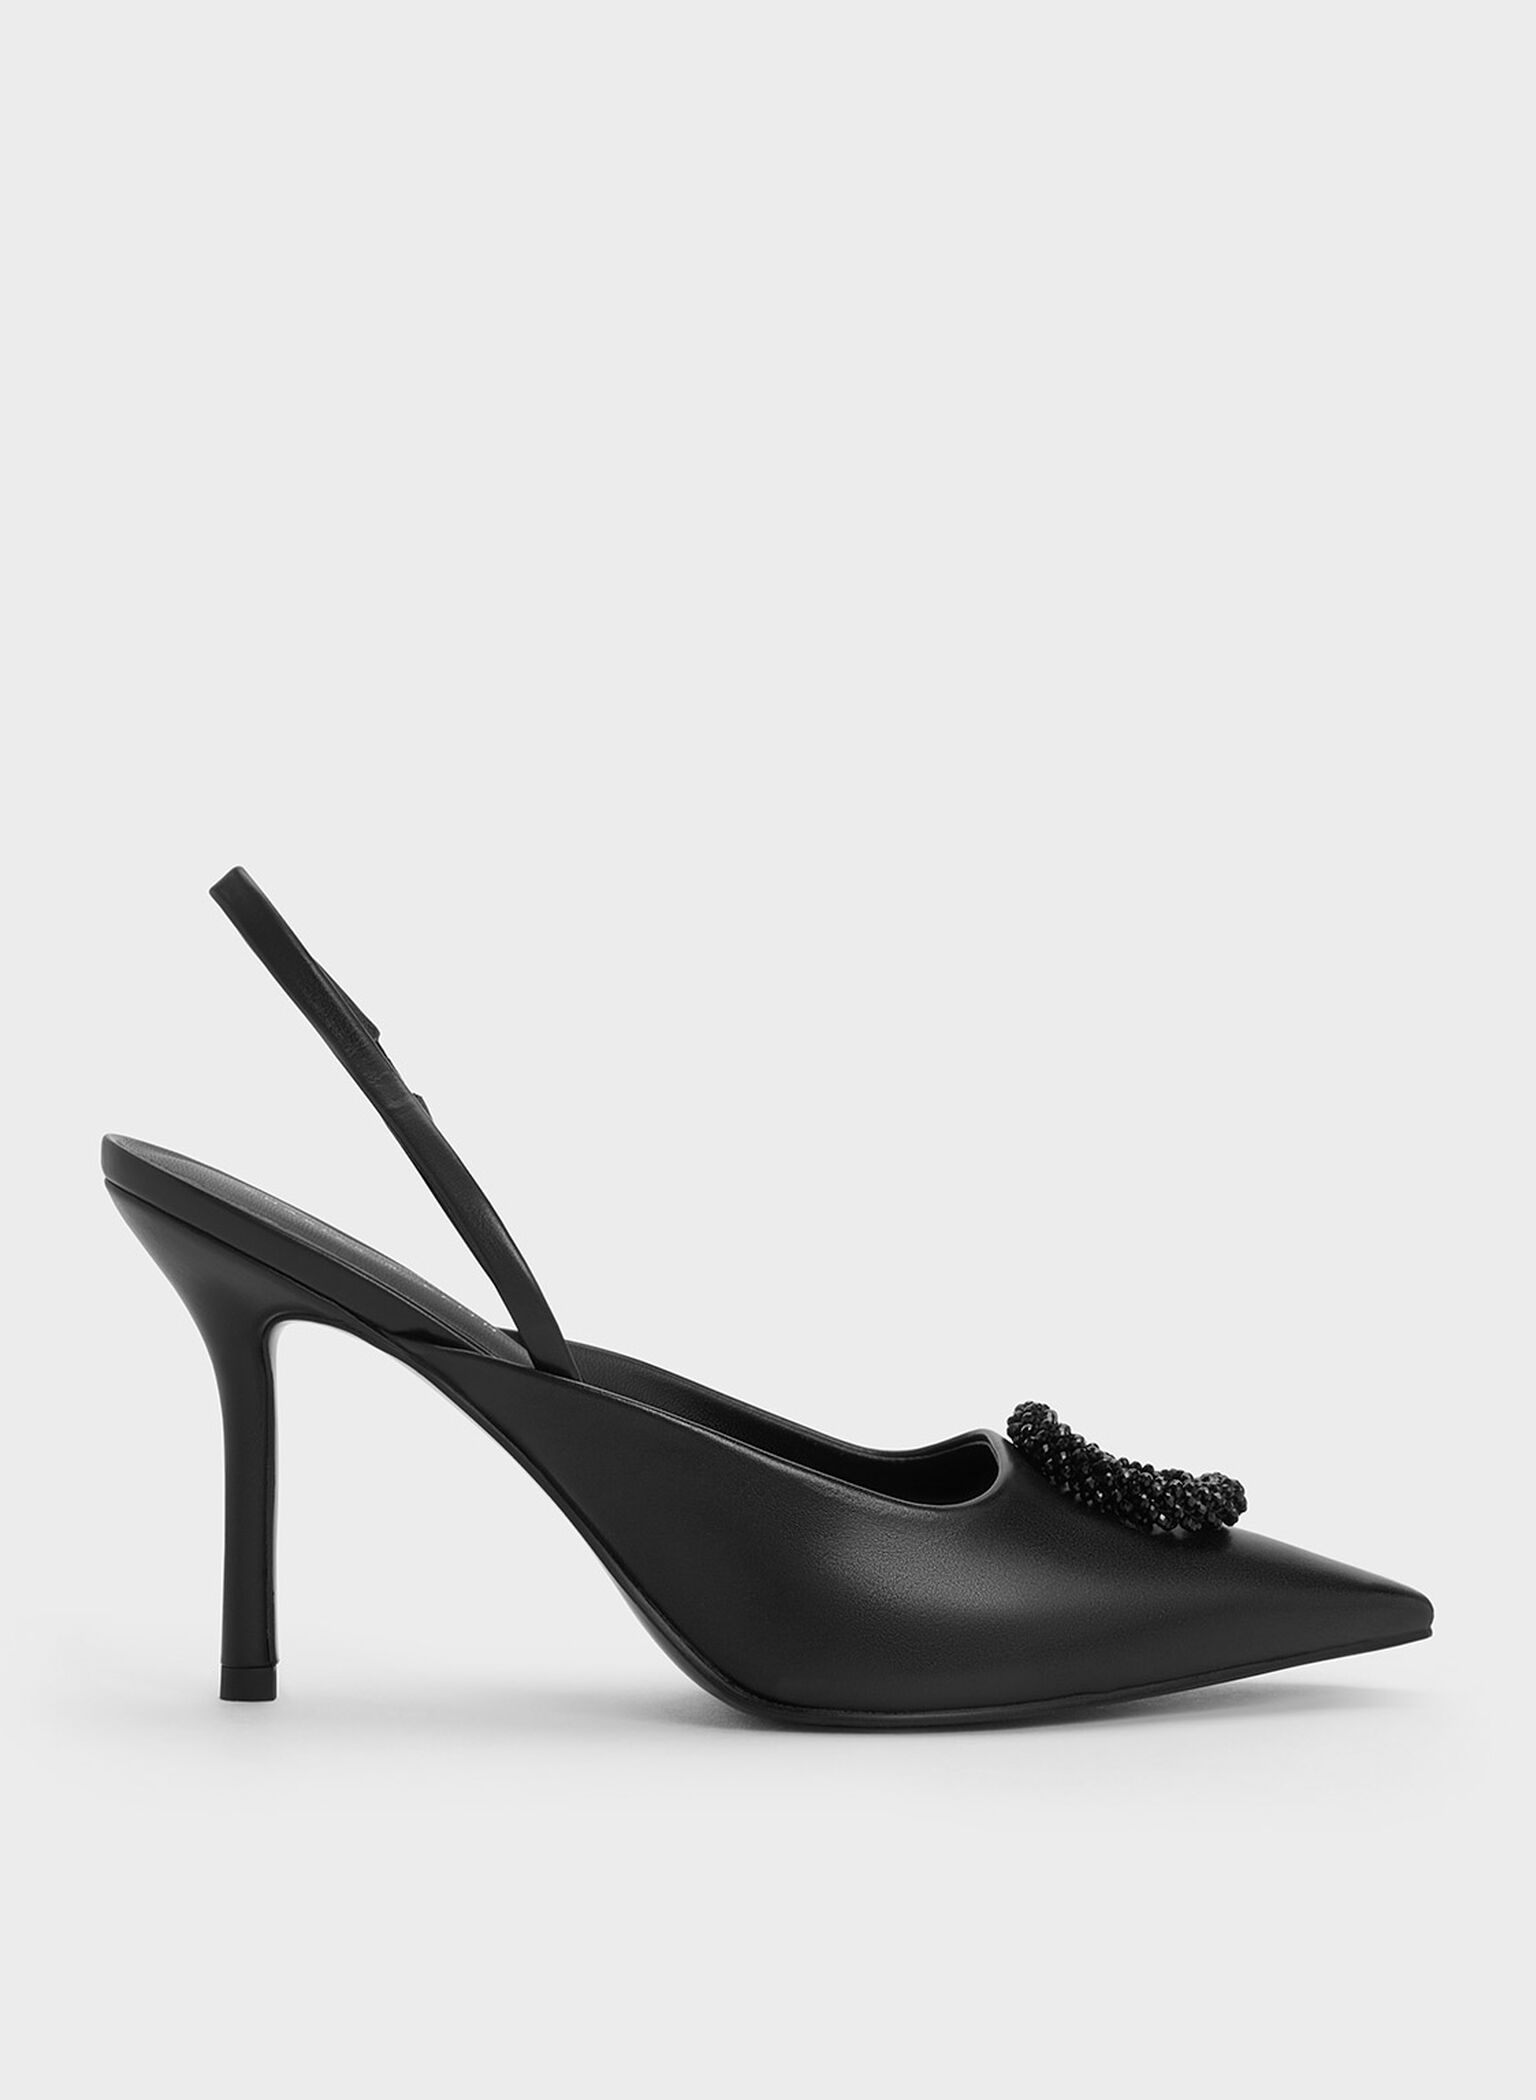 Adrizzlein Womens Slingback Heeled Pumps Closed Round